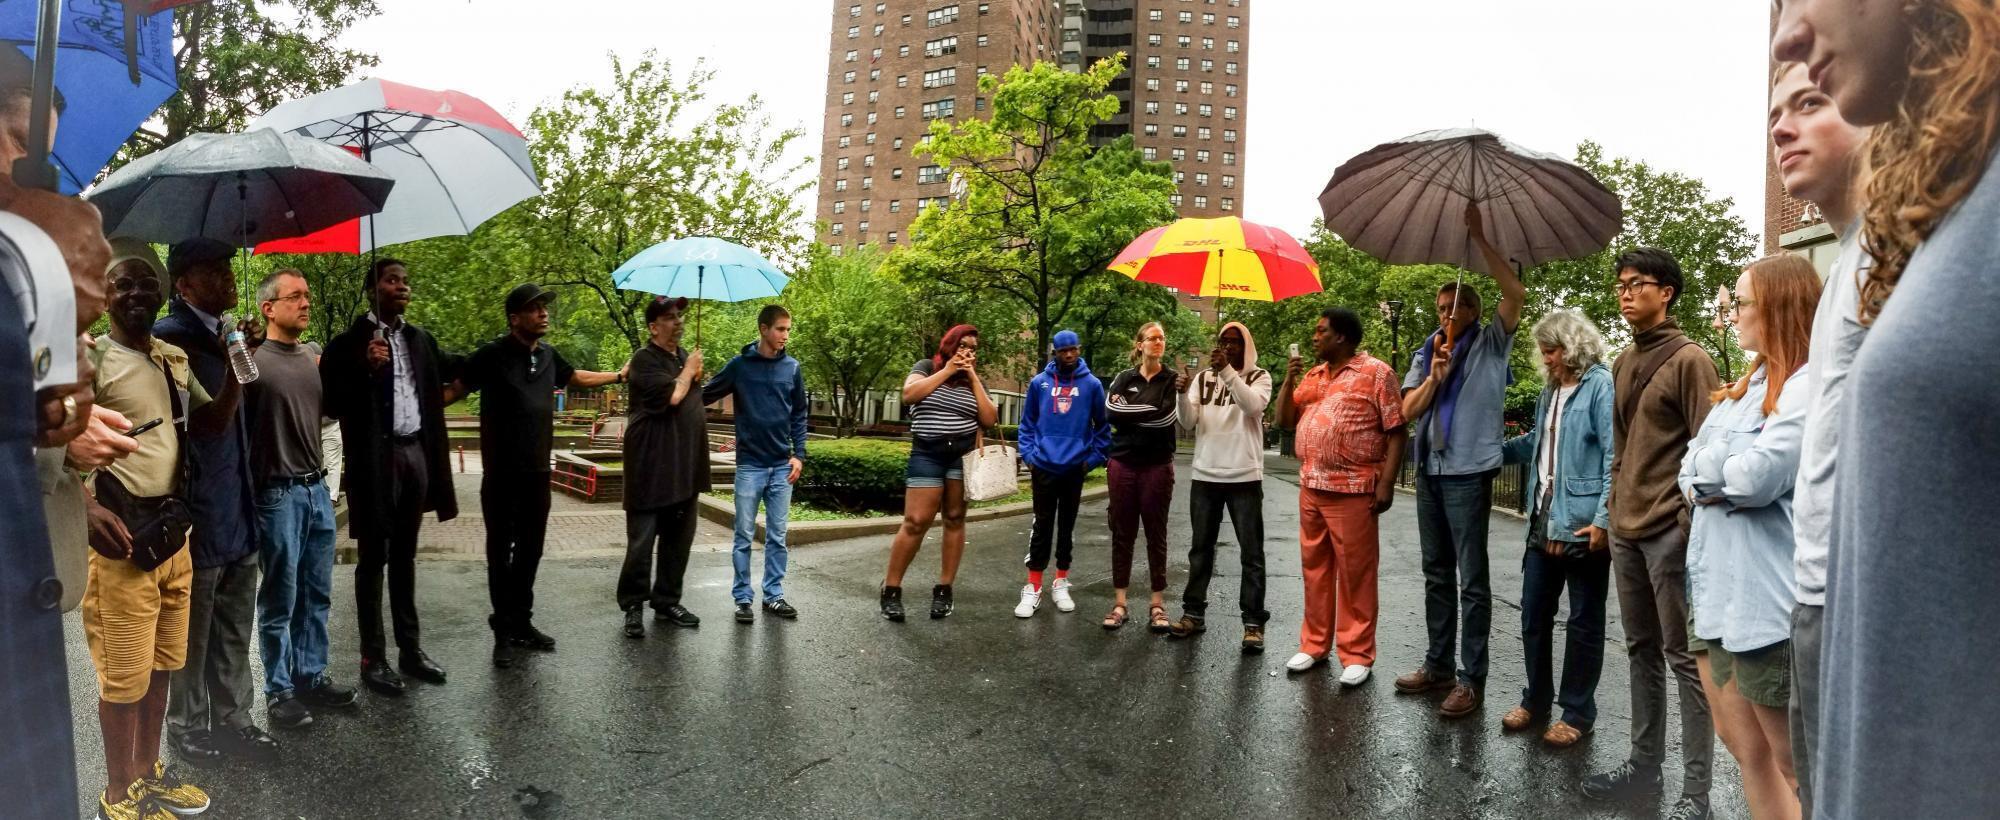 A group of young adults stand on pavement in a circle. Many of them are holding umbrellas.